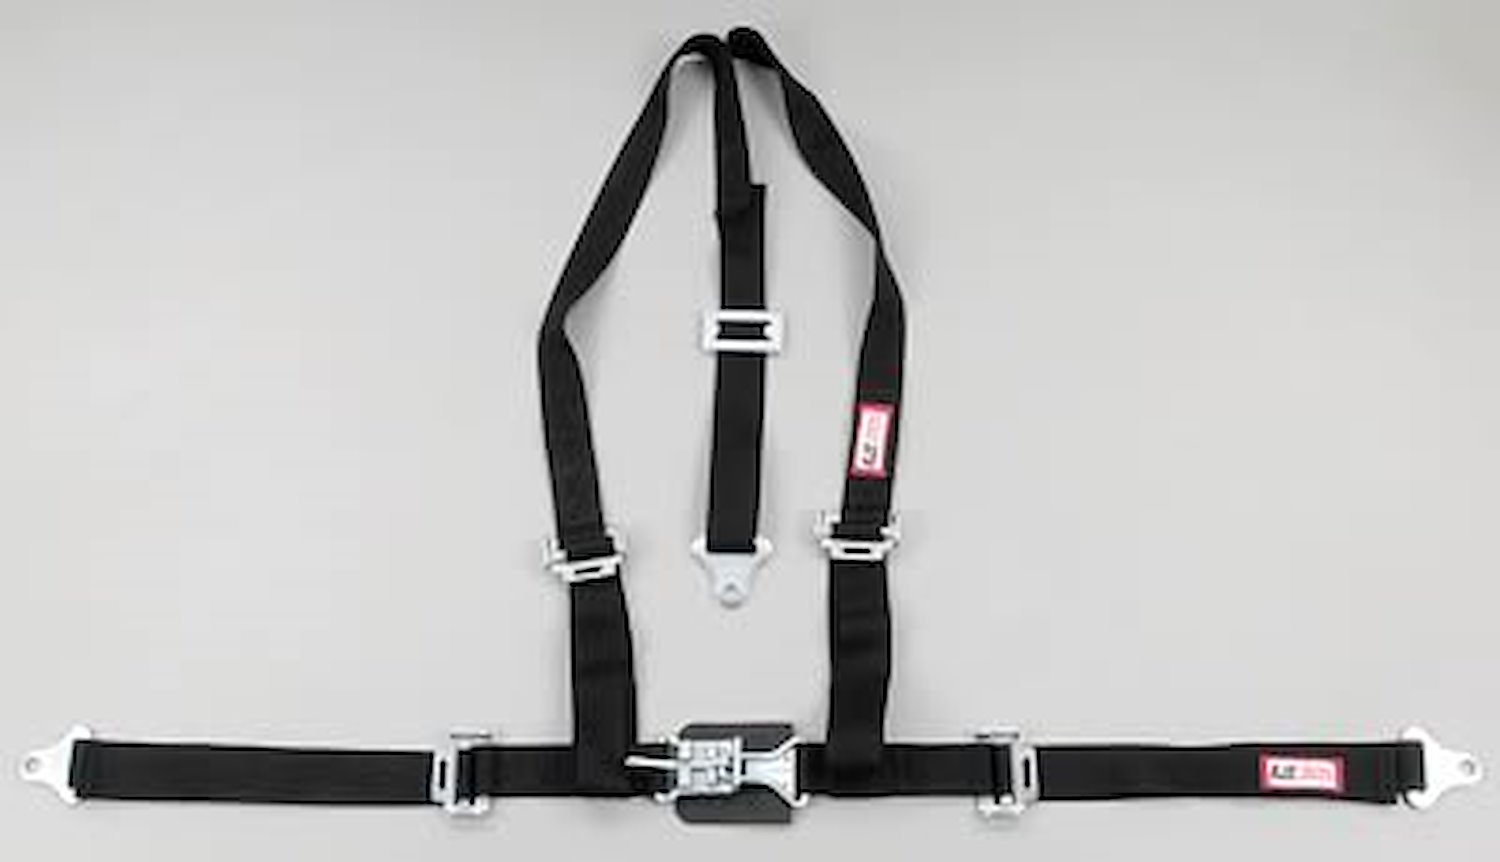 NON-SFI L&L HARNESS 3 PULL DOWN Lap BELT SNAP SEWN IN 2 S.H. Y FLOOR Mount w/STERNUM STRAP WRAP/SNAP HOT PINK